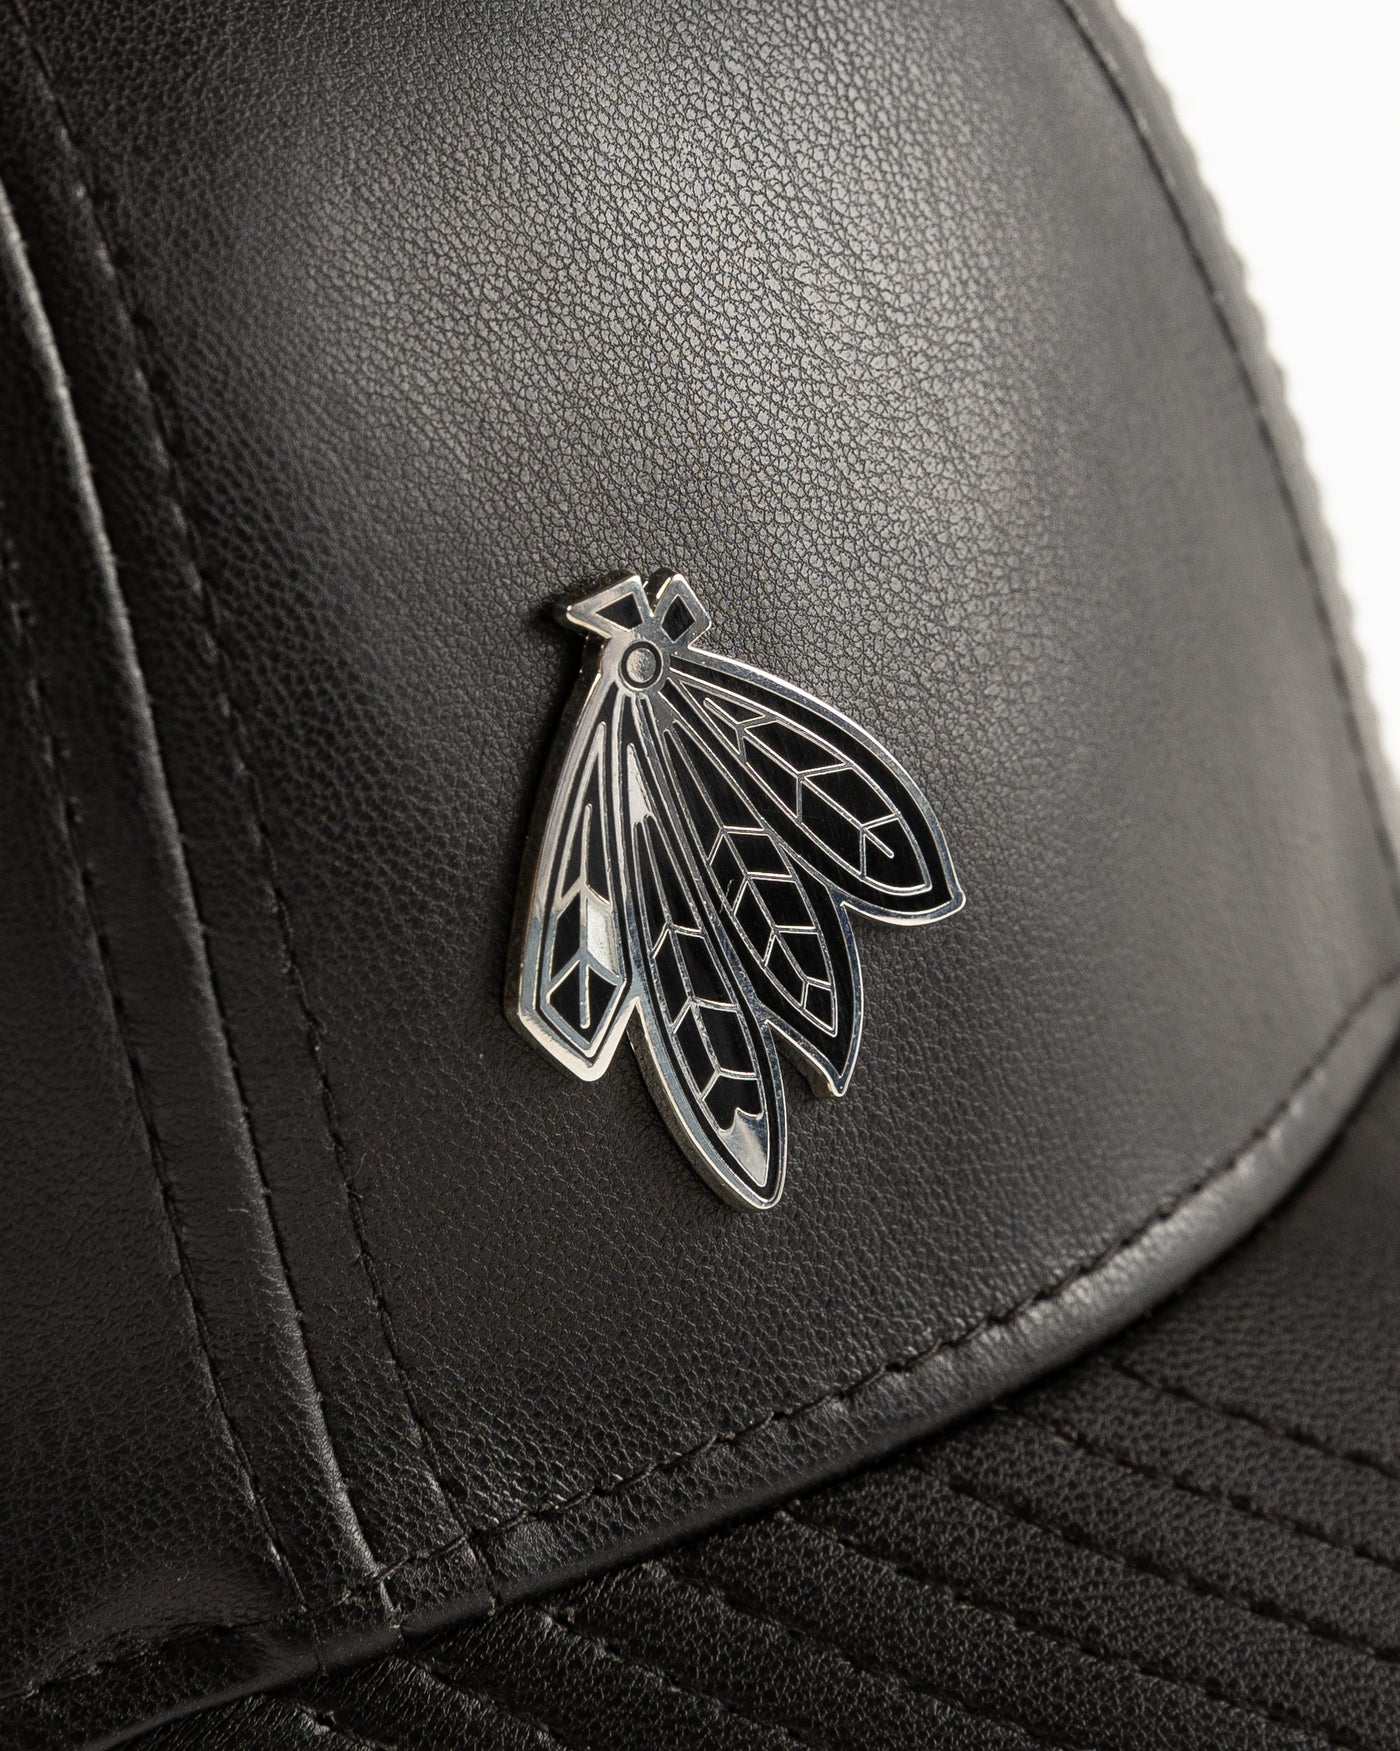 black leather New Era cap with Chicago Blackhawks four feathers logo in silver pin on front - detail lay flat